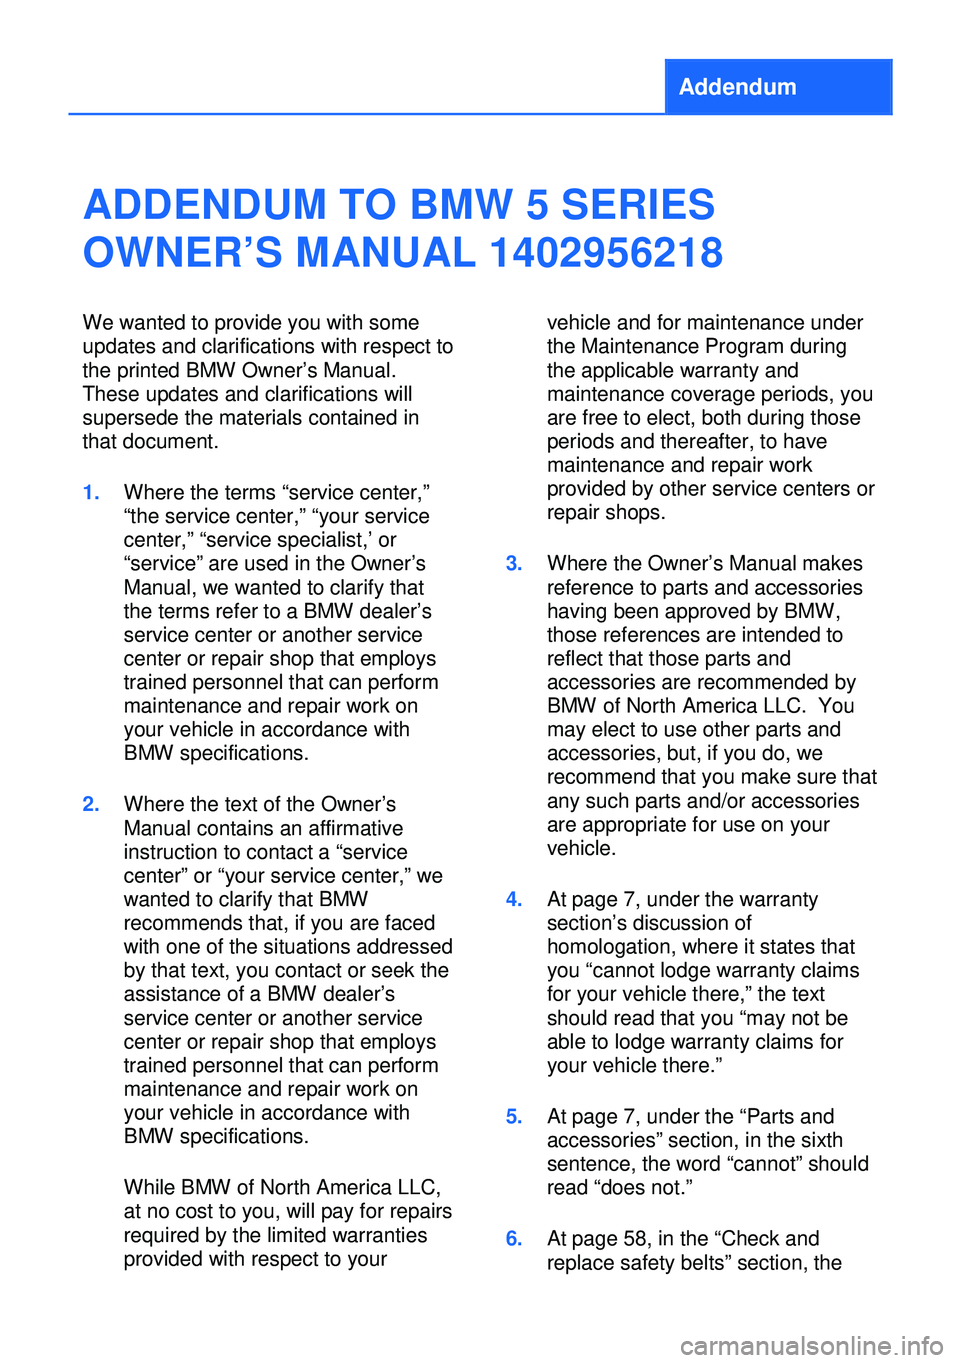 BMW 550I XDRIVE SEDAN 2014  Owners Manual Addendum
ADDENDUM TO BMW 5 SERIES
OWNER’S MANUAL 1402956218
We wanted to provide you with some
updates and clarifications with respect to
the printed BMW Owner’s Manual.
These updates and clarific